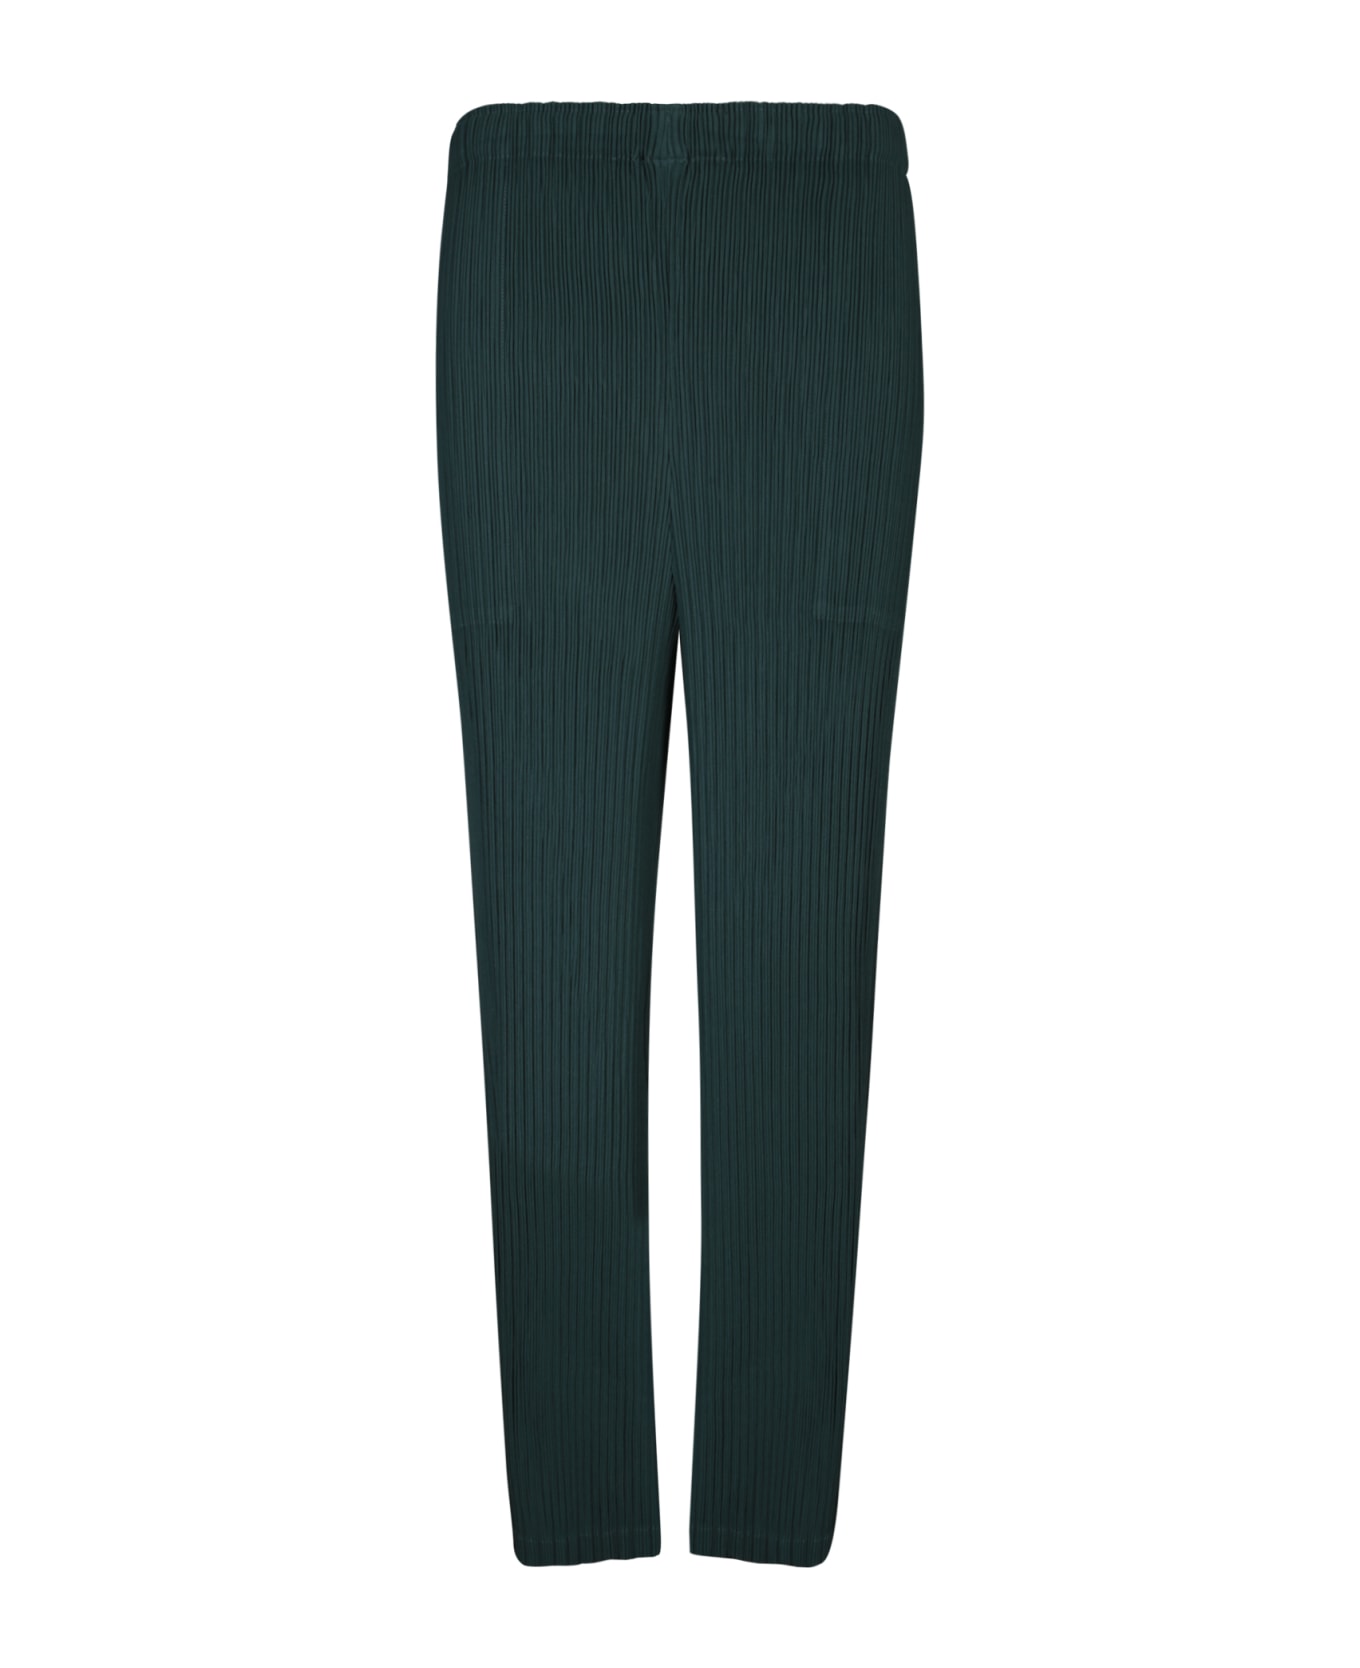 Issey Miyake Pleated Green Straight Trousers - Green